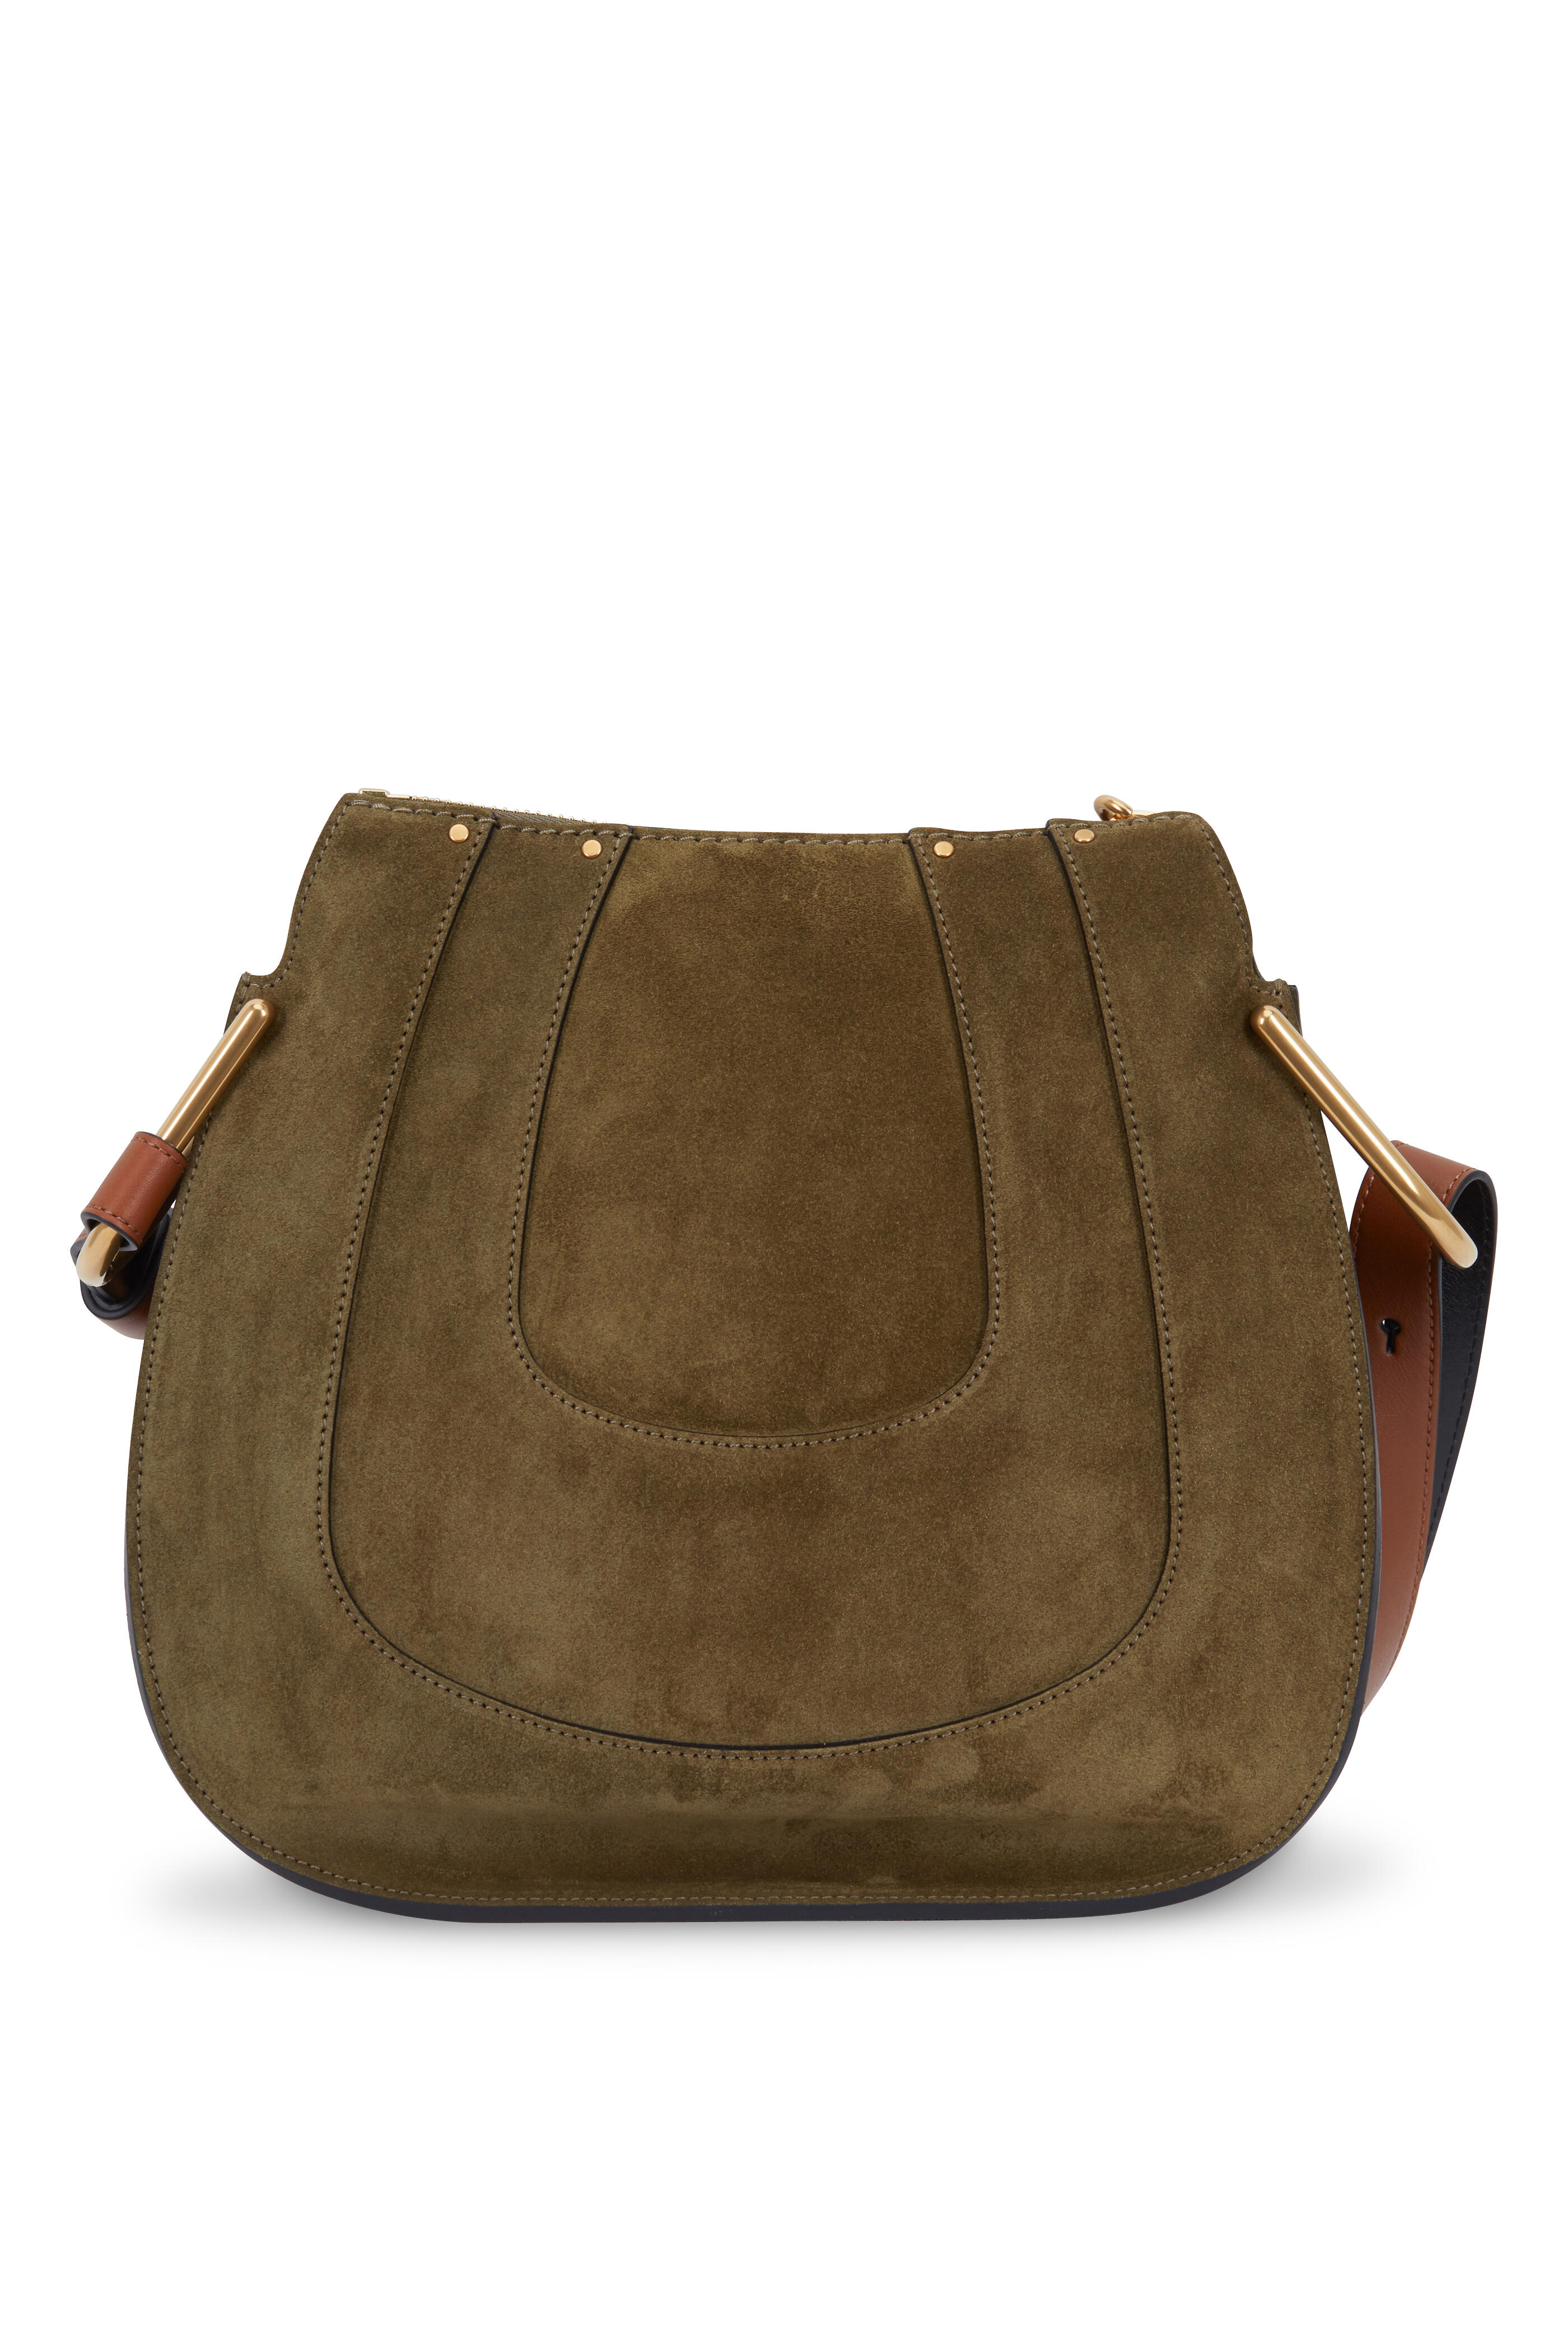 Chloé - Hayley Olive Green Suede Convertible Hobo Bag